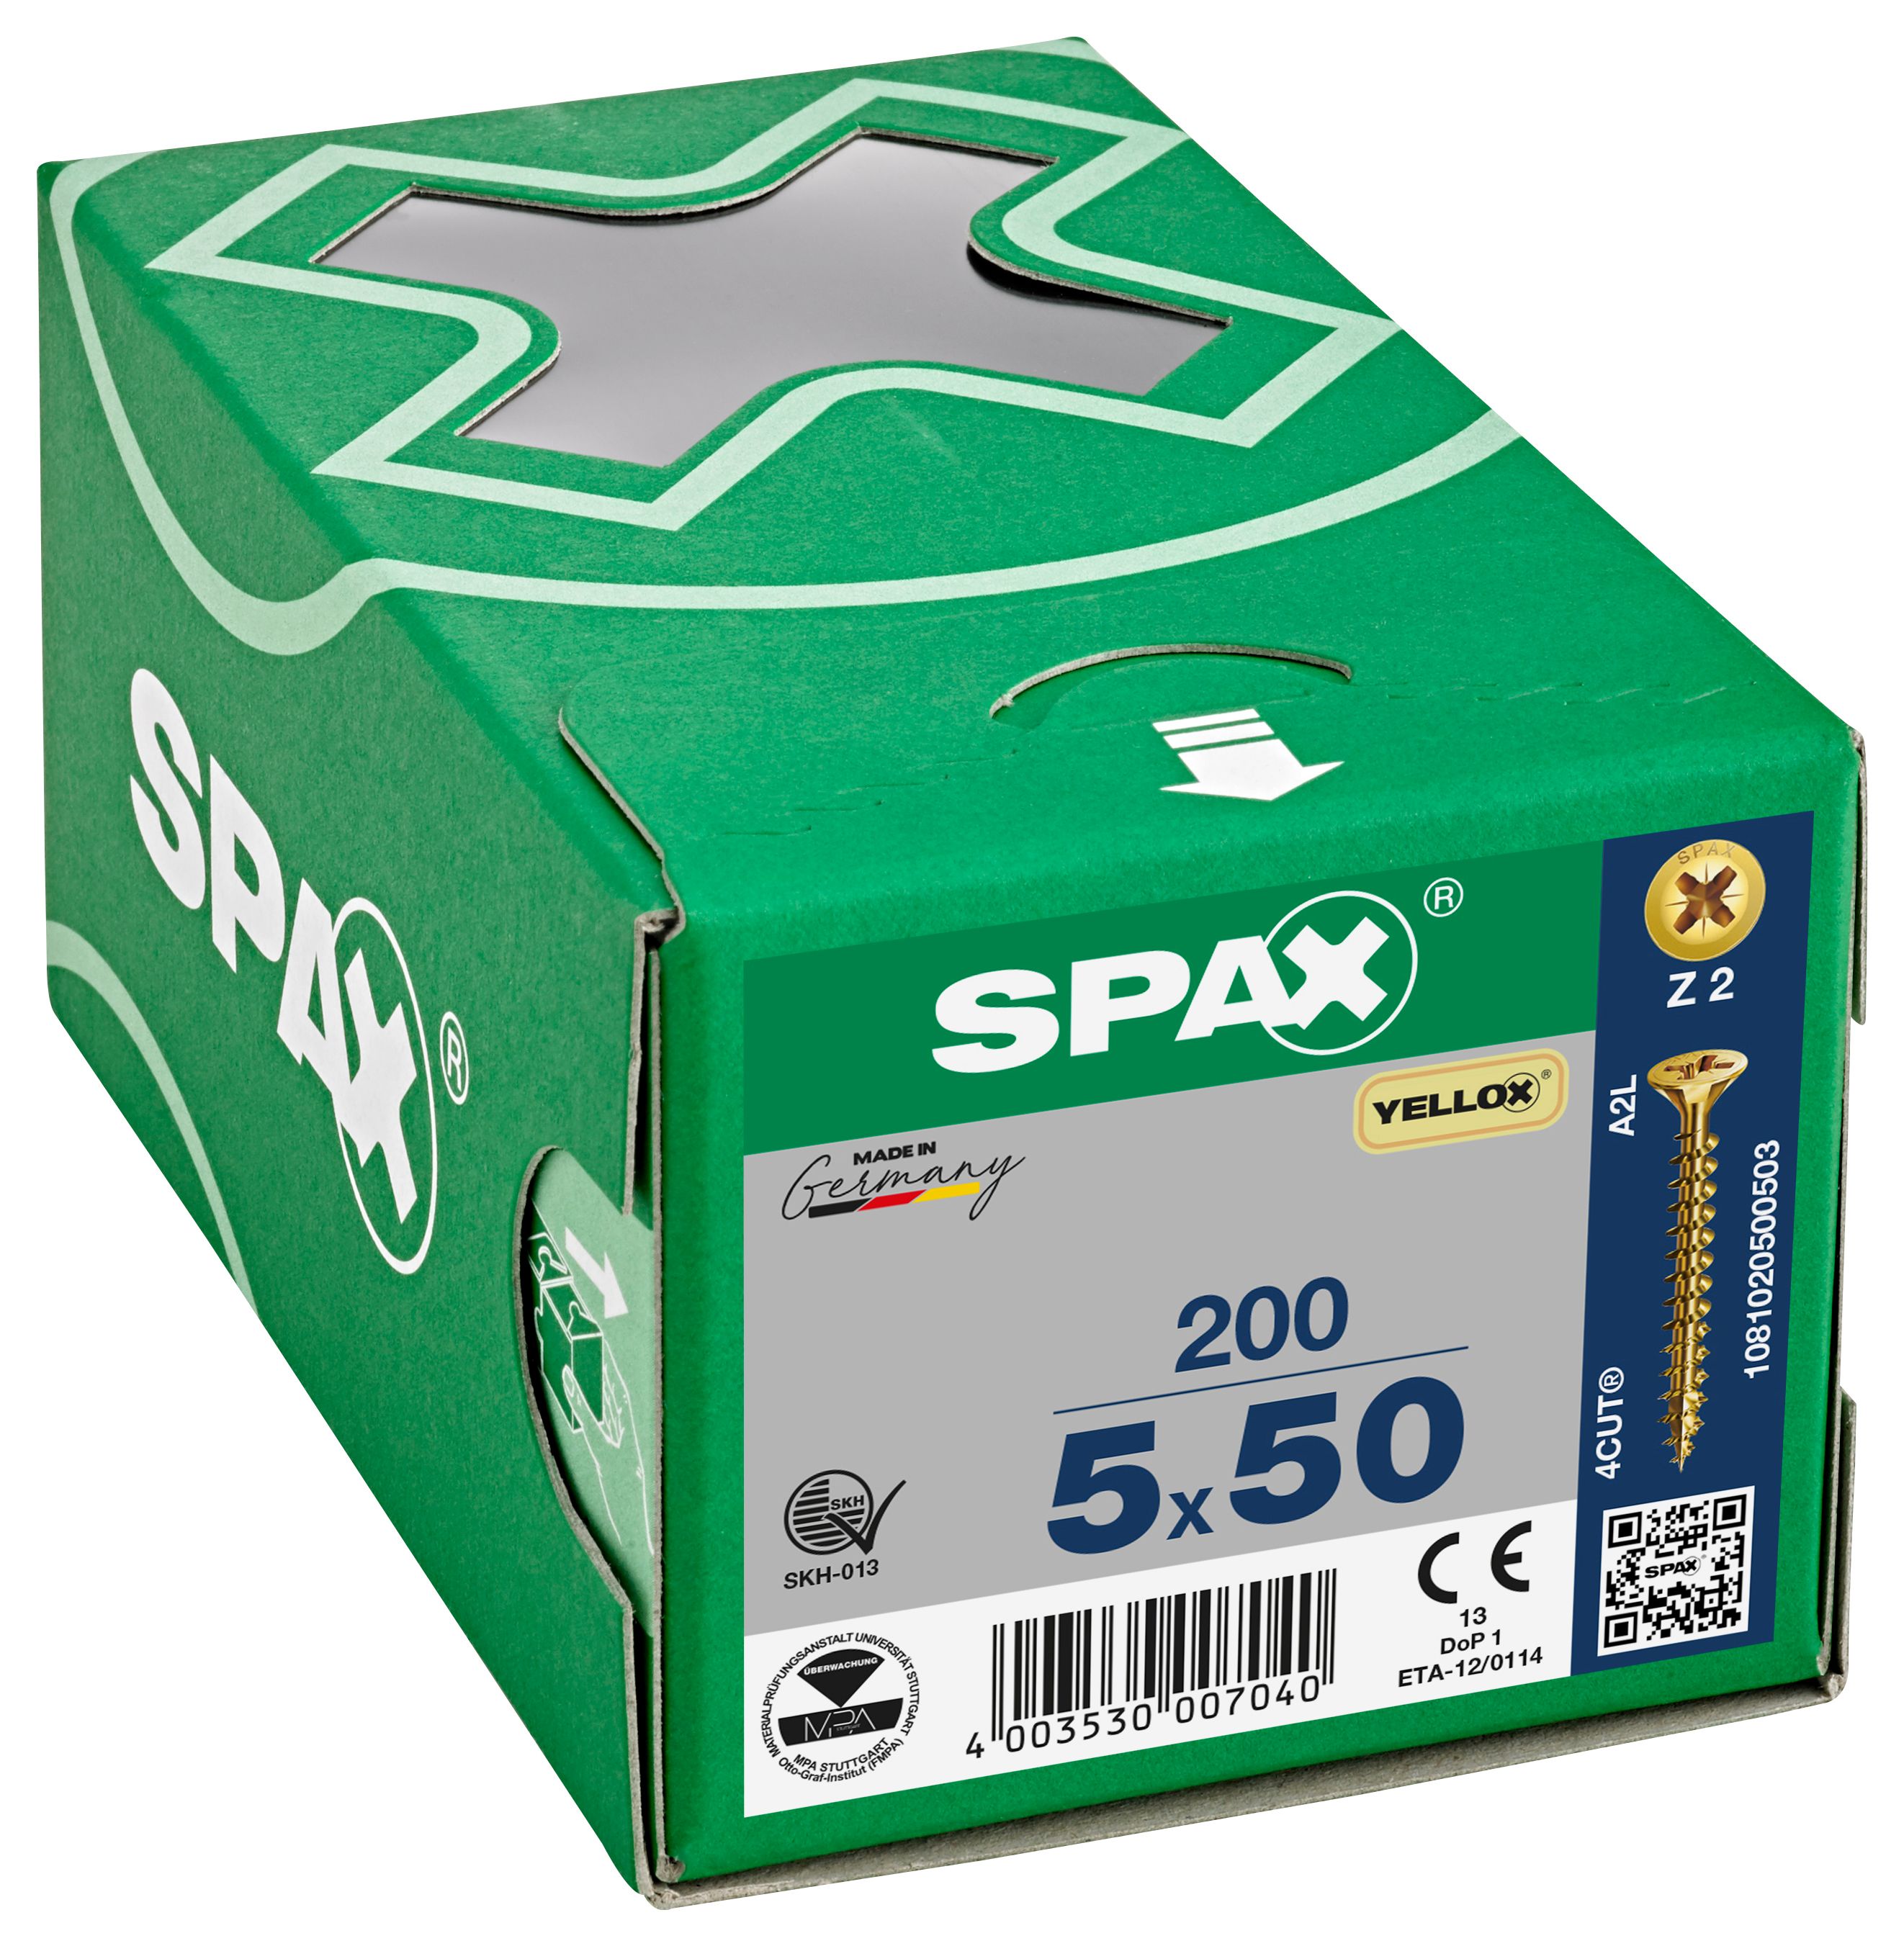 Image of Spax Pz Countersunk Yellox Screws - 5x50mm Pack Of 200